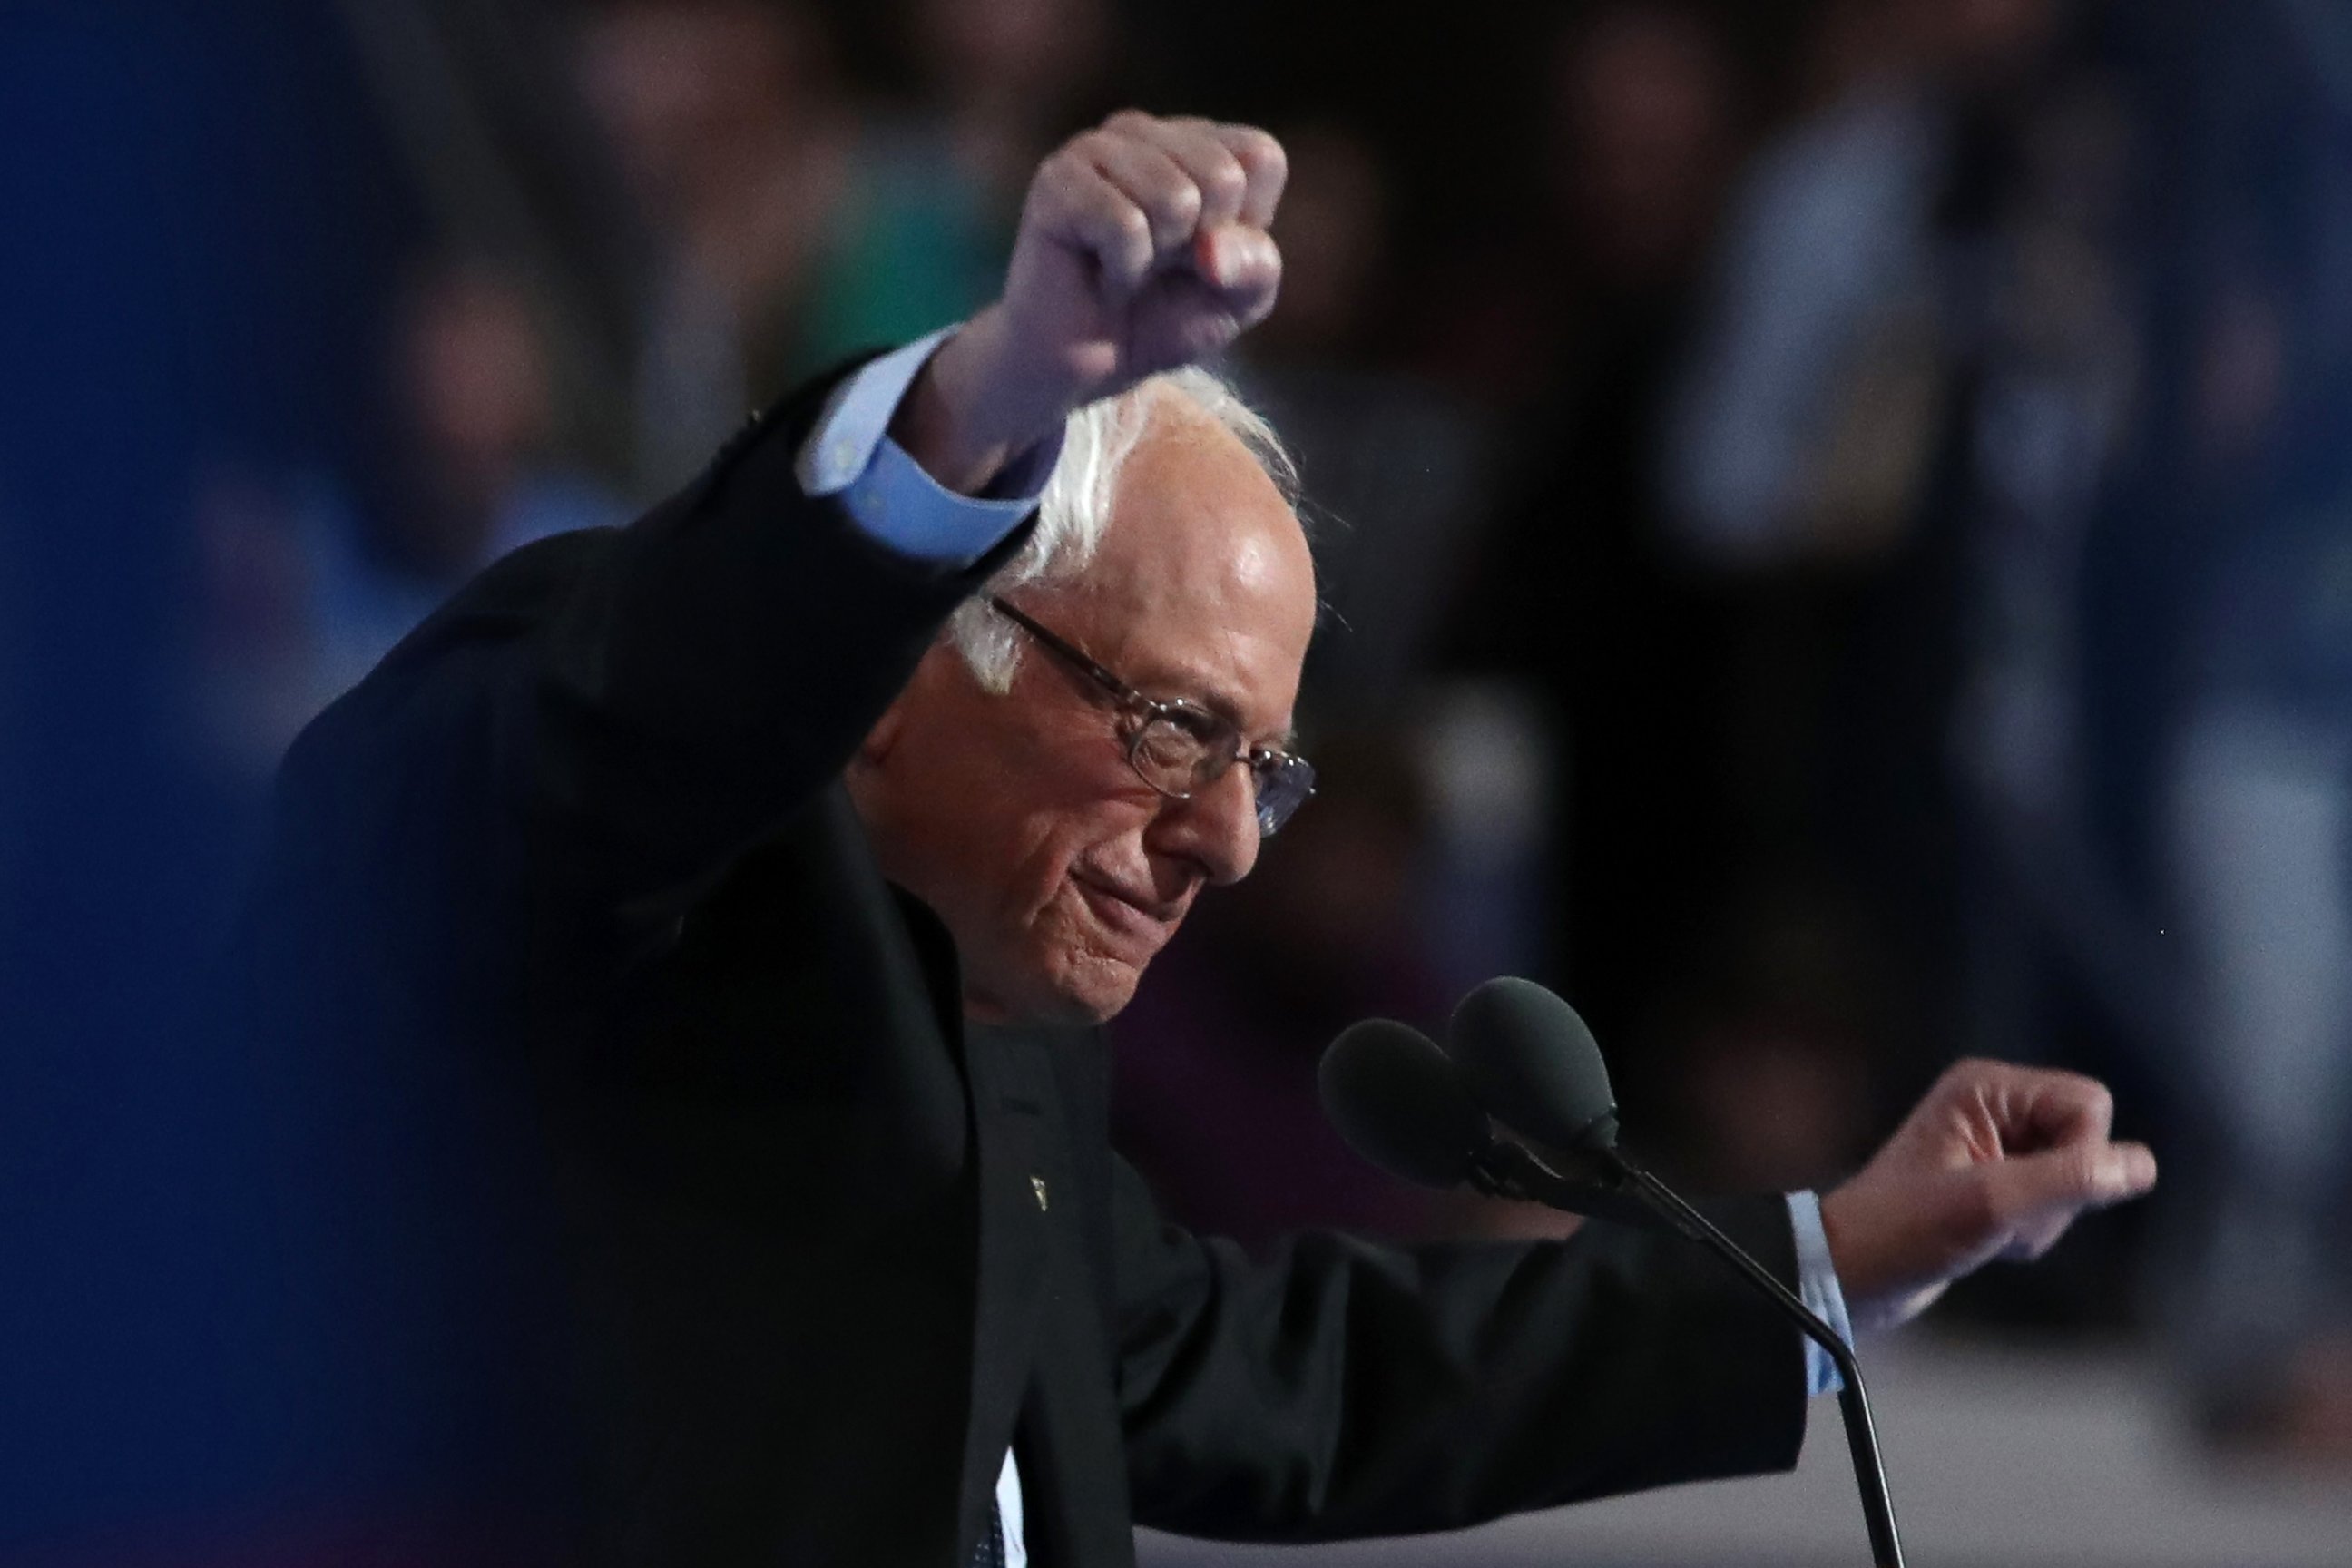 PHOTO: Sen. Bernie Sanders acknowledges the crowd before delivering remarks on the first day of the Democratic National Convention,  July 25, 2016 in Philadelphia.